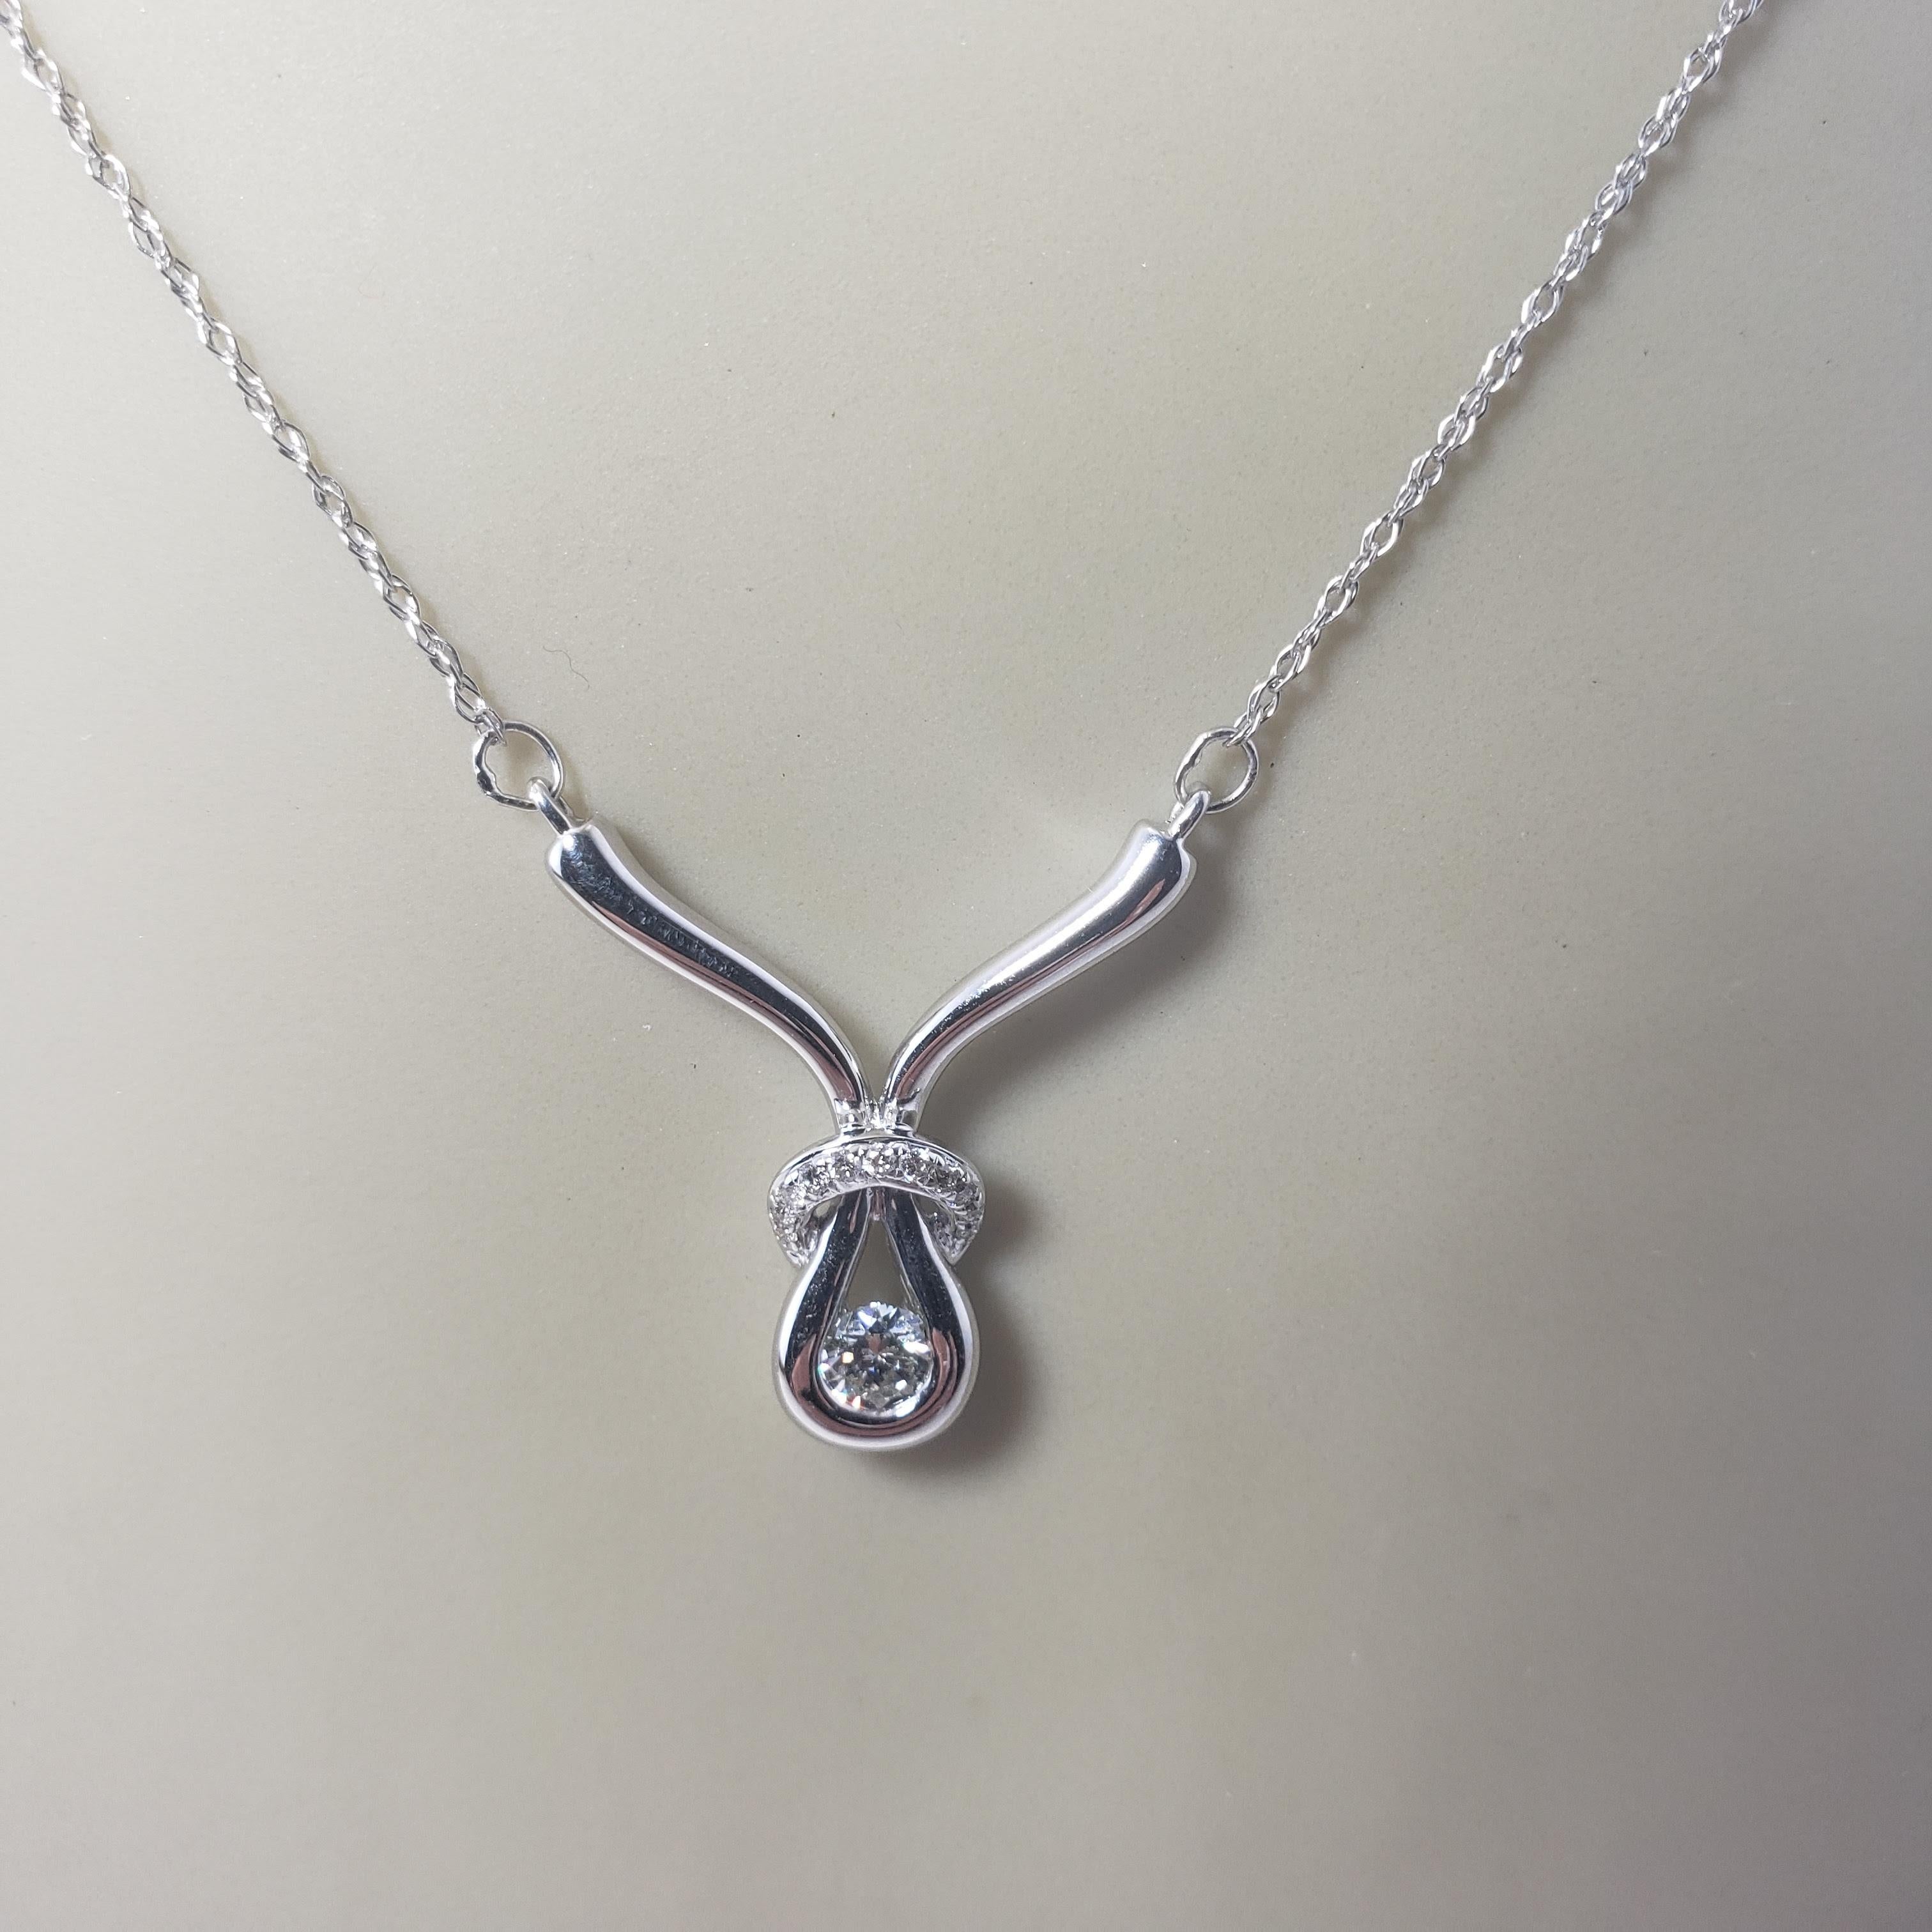 14 Karat White Gold and Diamond Pendant Necklace For Sale 2